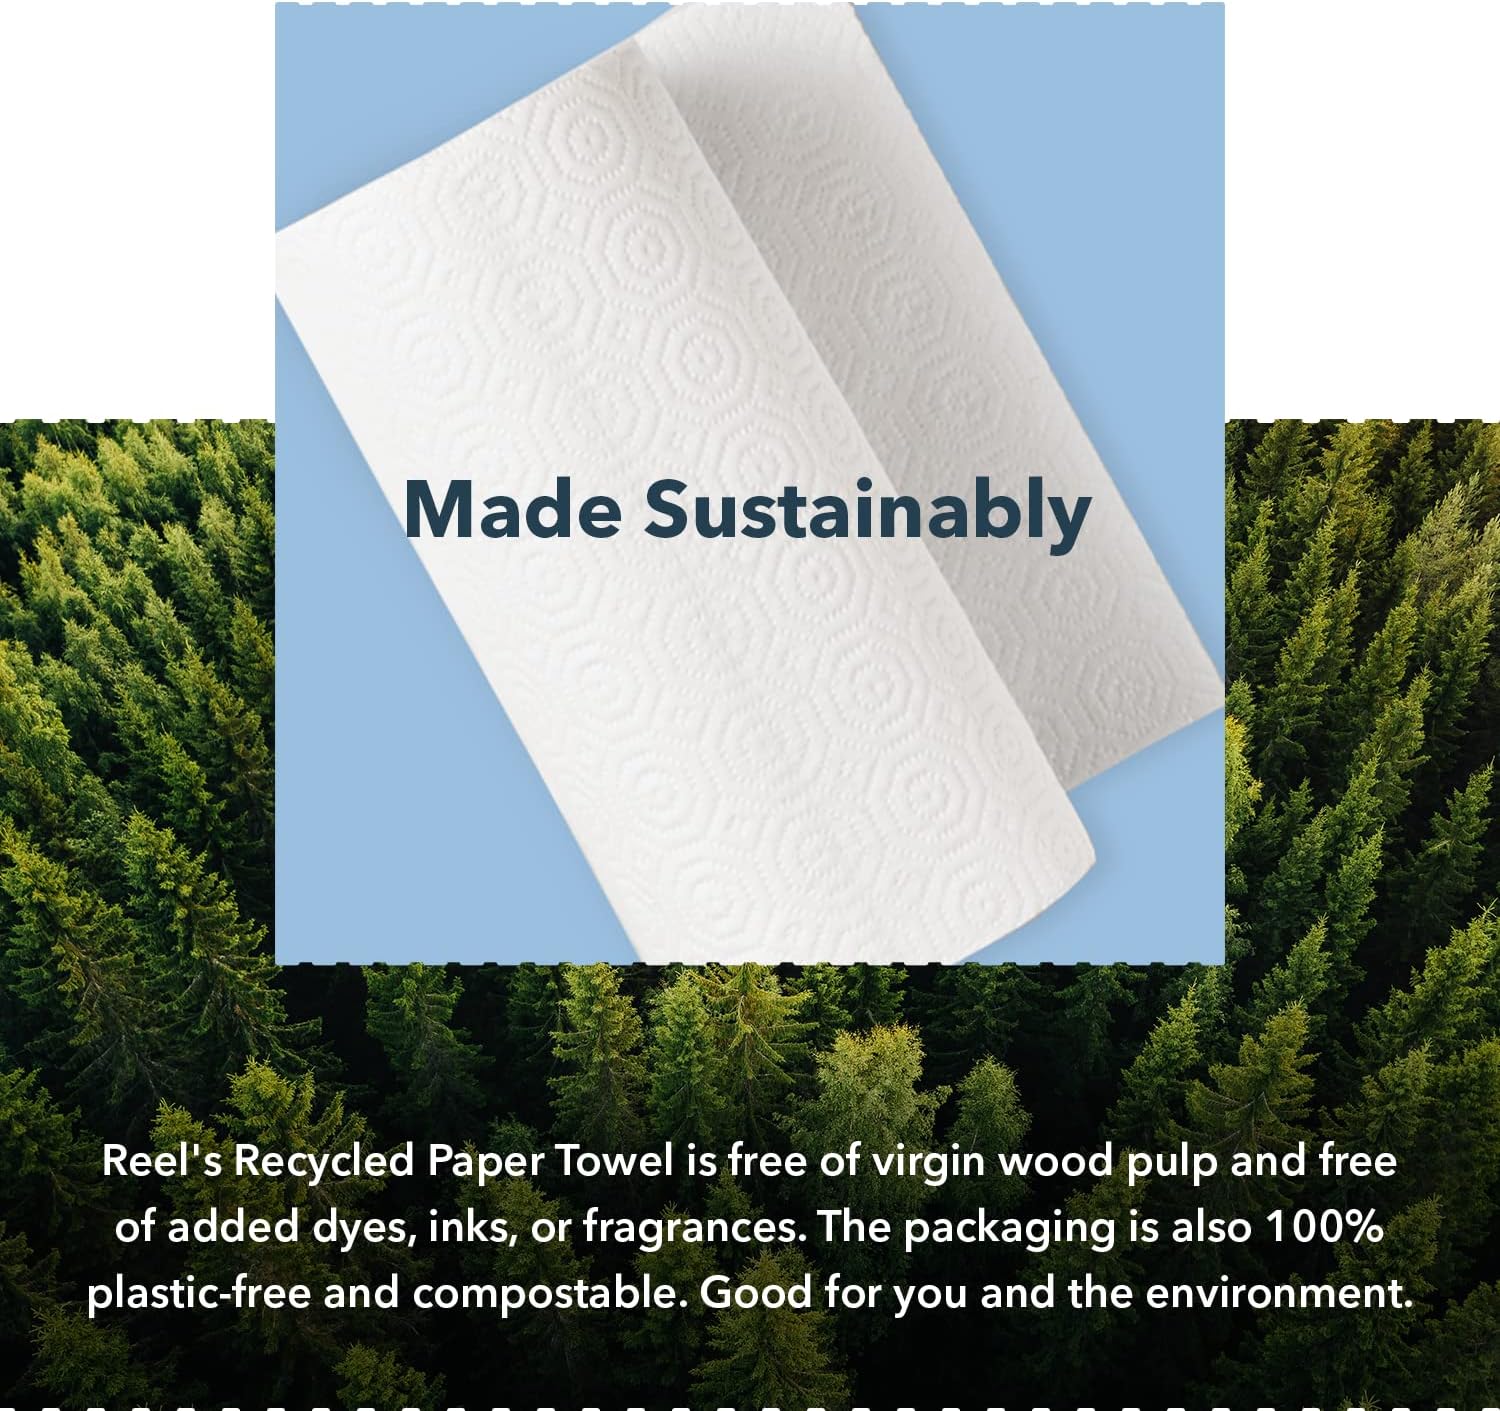 Reel Premium Recycled Paper Towels- 12 Rolls, 2-Ply Made From Tree-Free,  100% Recycled Paper - Eco-Friendly, Hypoallergenic and Zero Plastic  Packaging